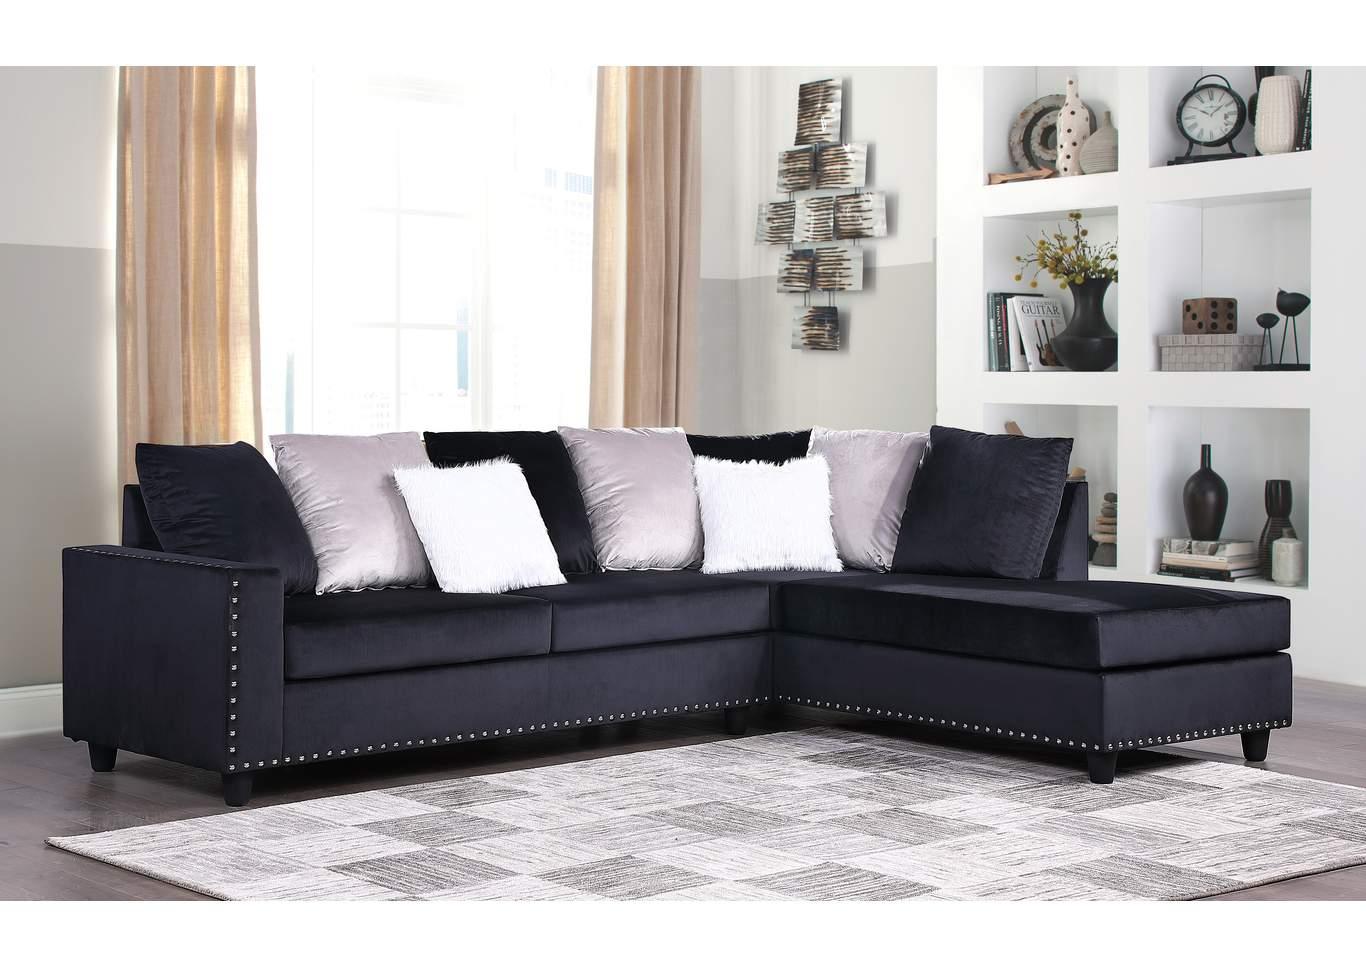 Contemporary, Modern Sectional Sofa MARTHA GHF-808857834874 in Black Fabric